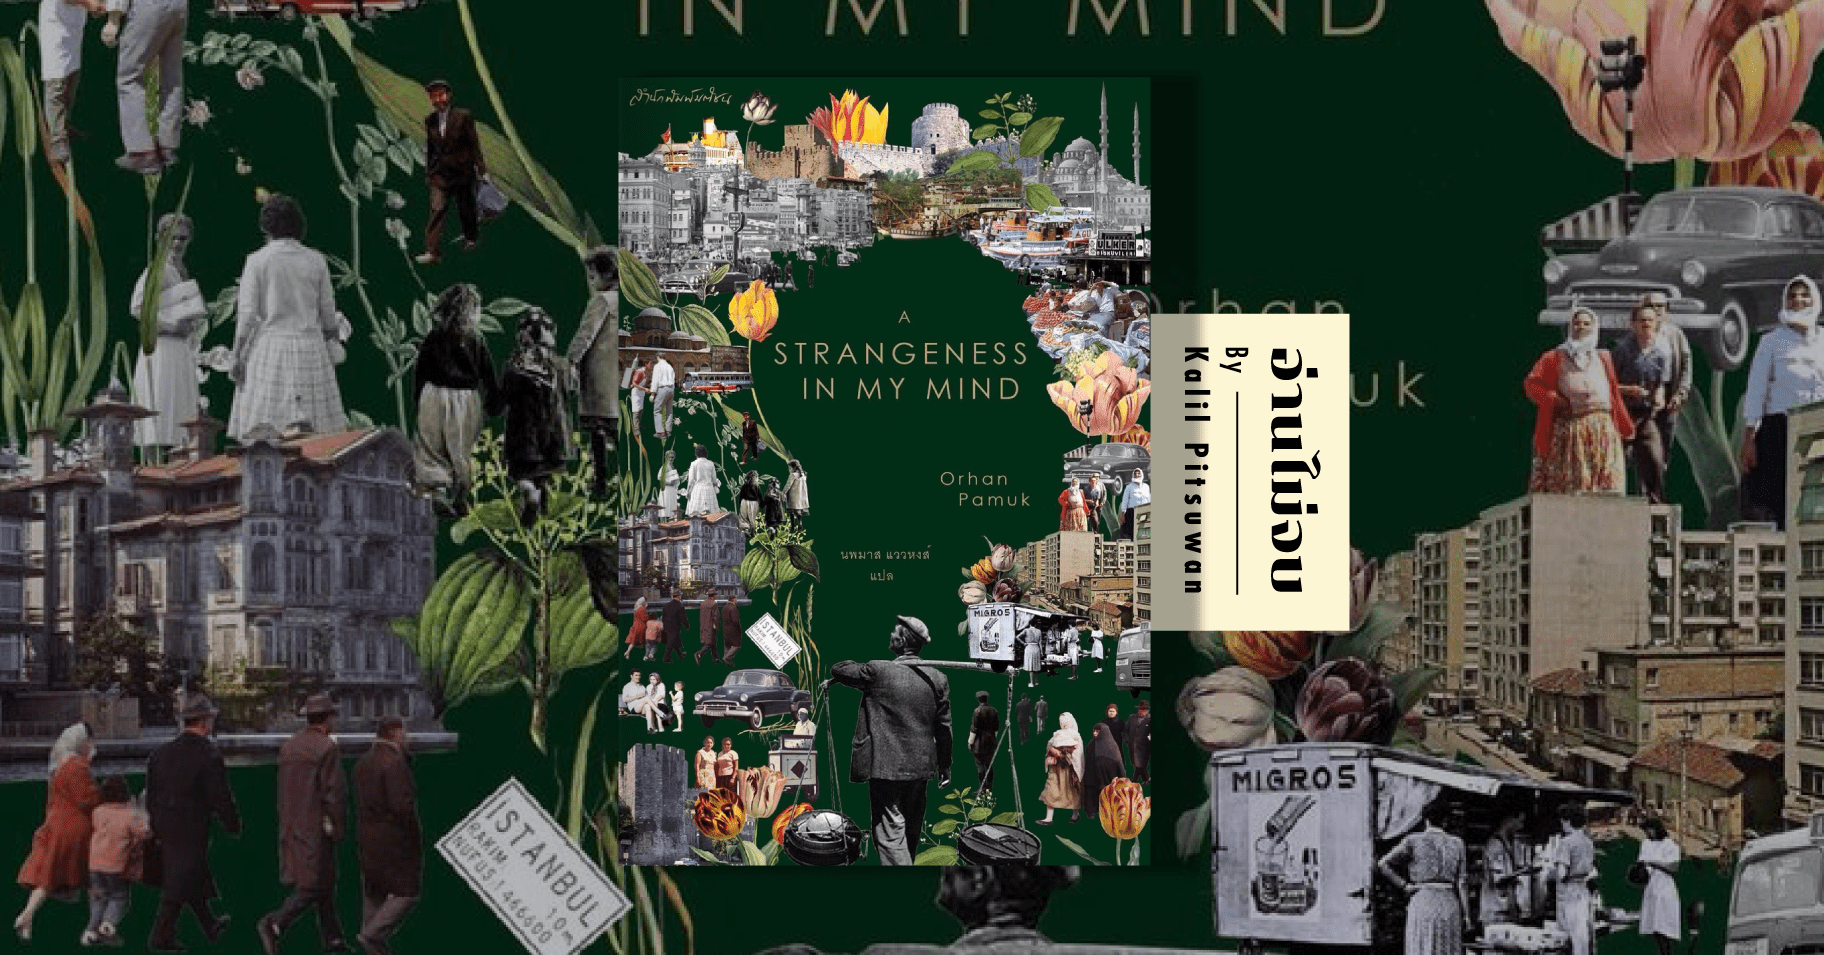 a strangeness in my mind by orhan pamuk